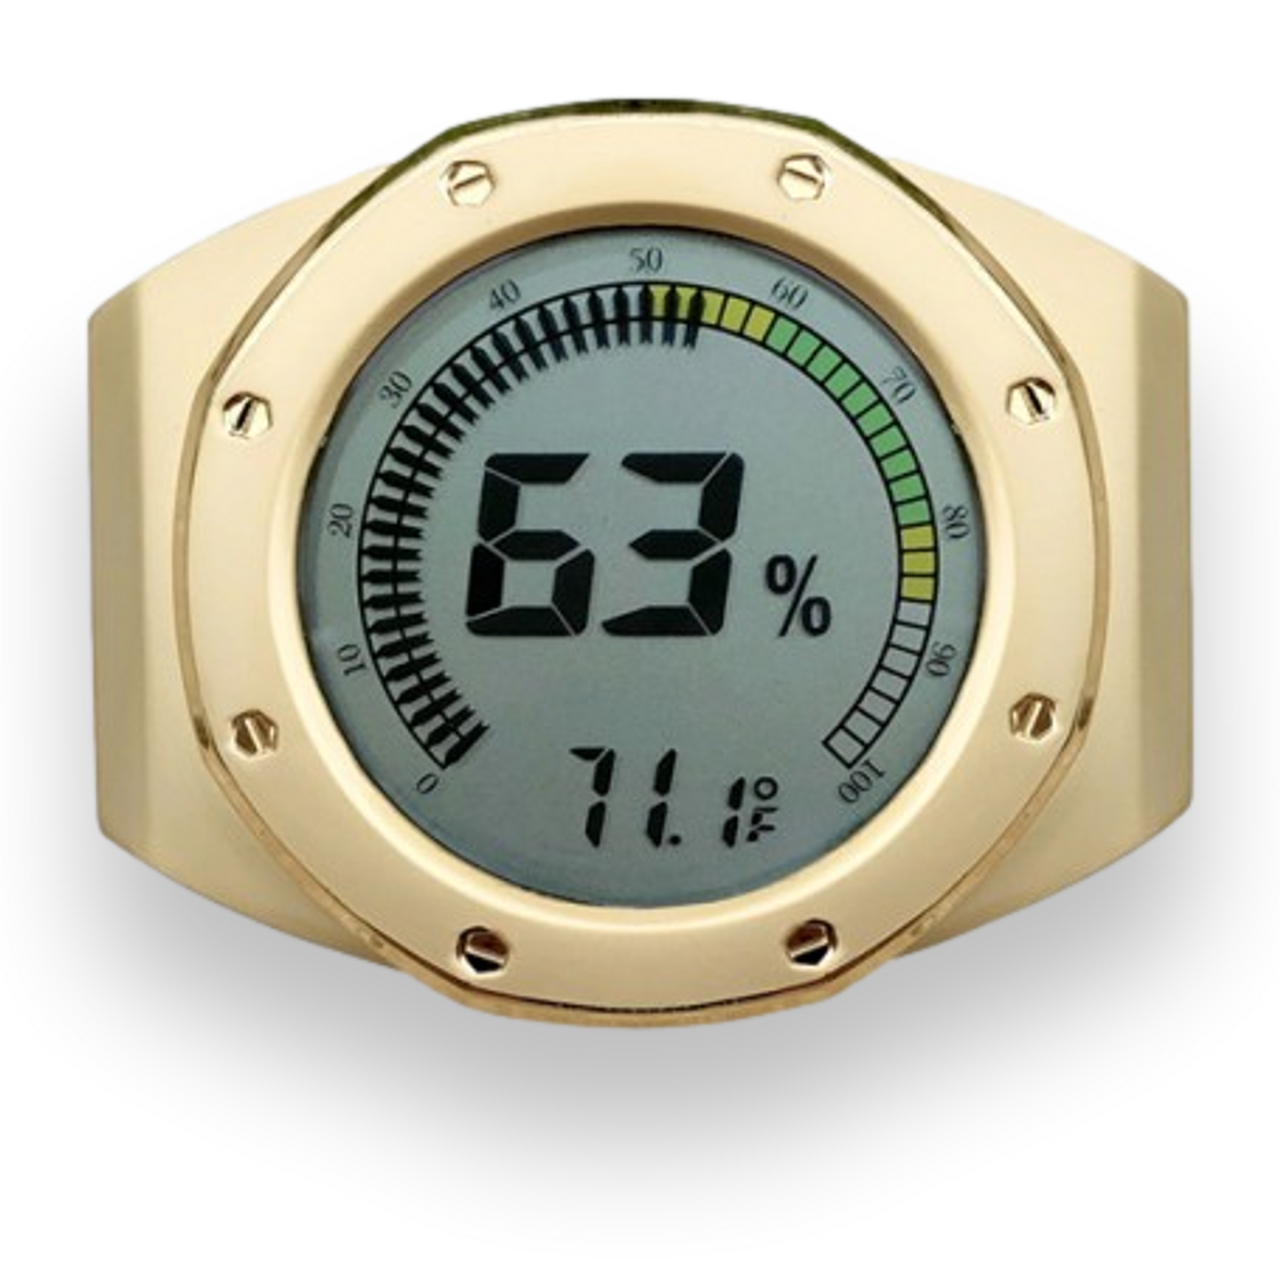 https://cdn11.bigcommerce.com/s-c63ufk/images/stencil/1280x1280/products/1647/8241/Prestige-Watch-Style-Digital-Hygrometer-Gold-HYDIGWTCH_G-Exterior-Front-1_clipped_rev_1__78862.1622428465.png?c=2?imbypass=on